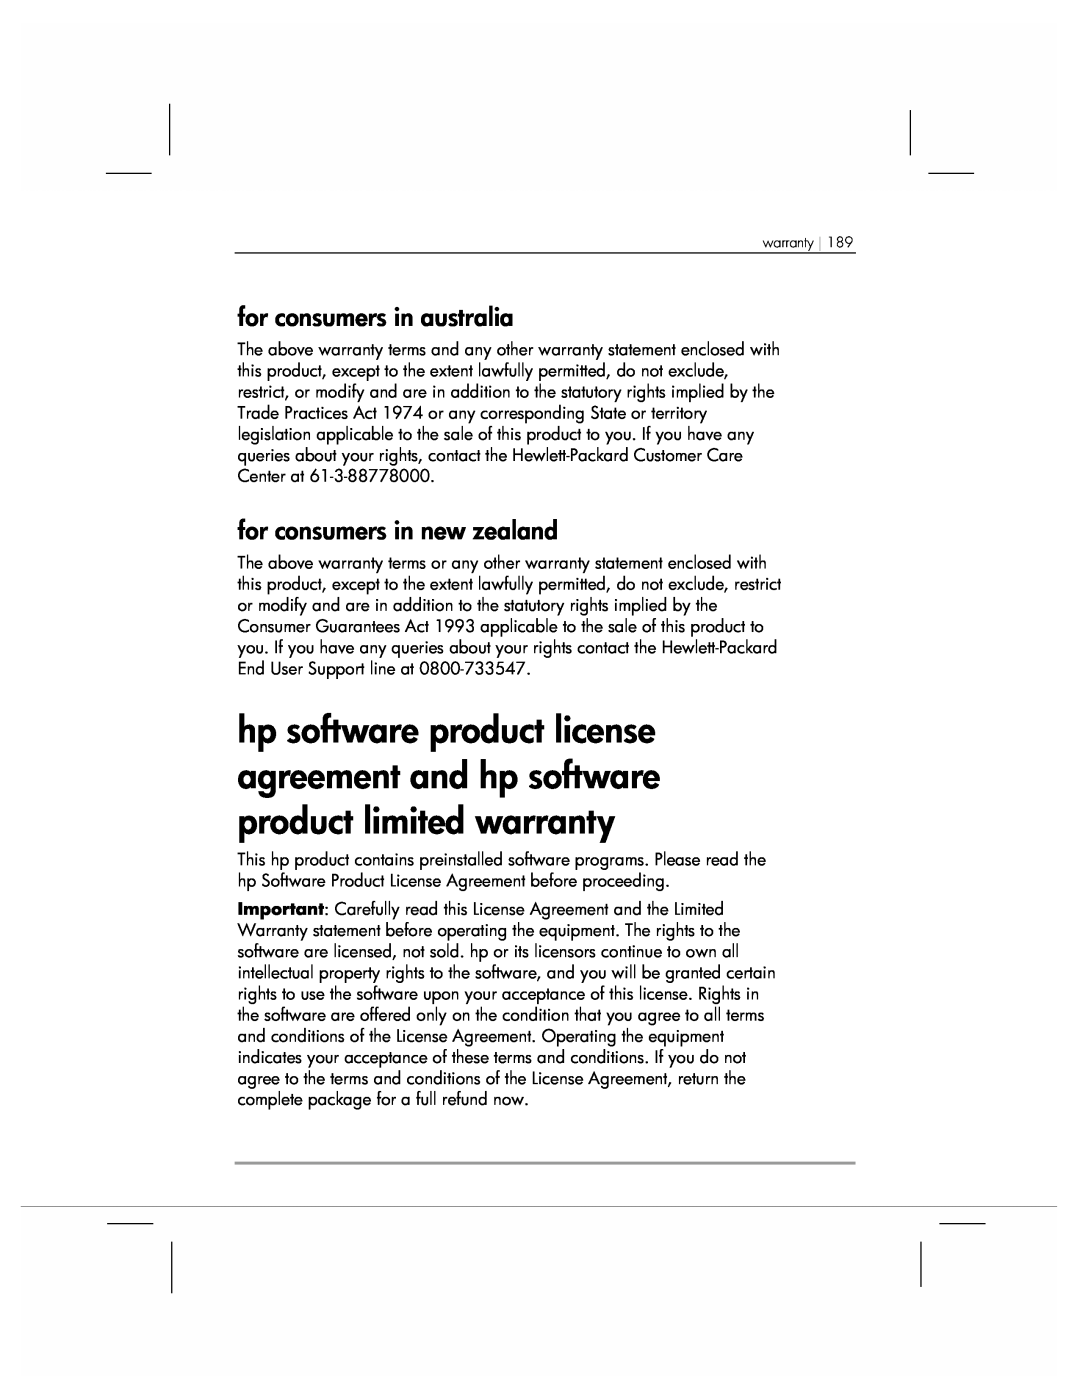 HP 920 manual for consumers in australia, for consumers in new zealand, warranty 